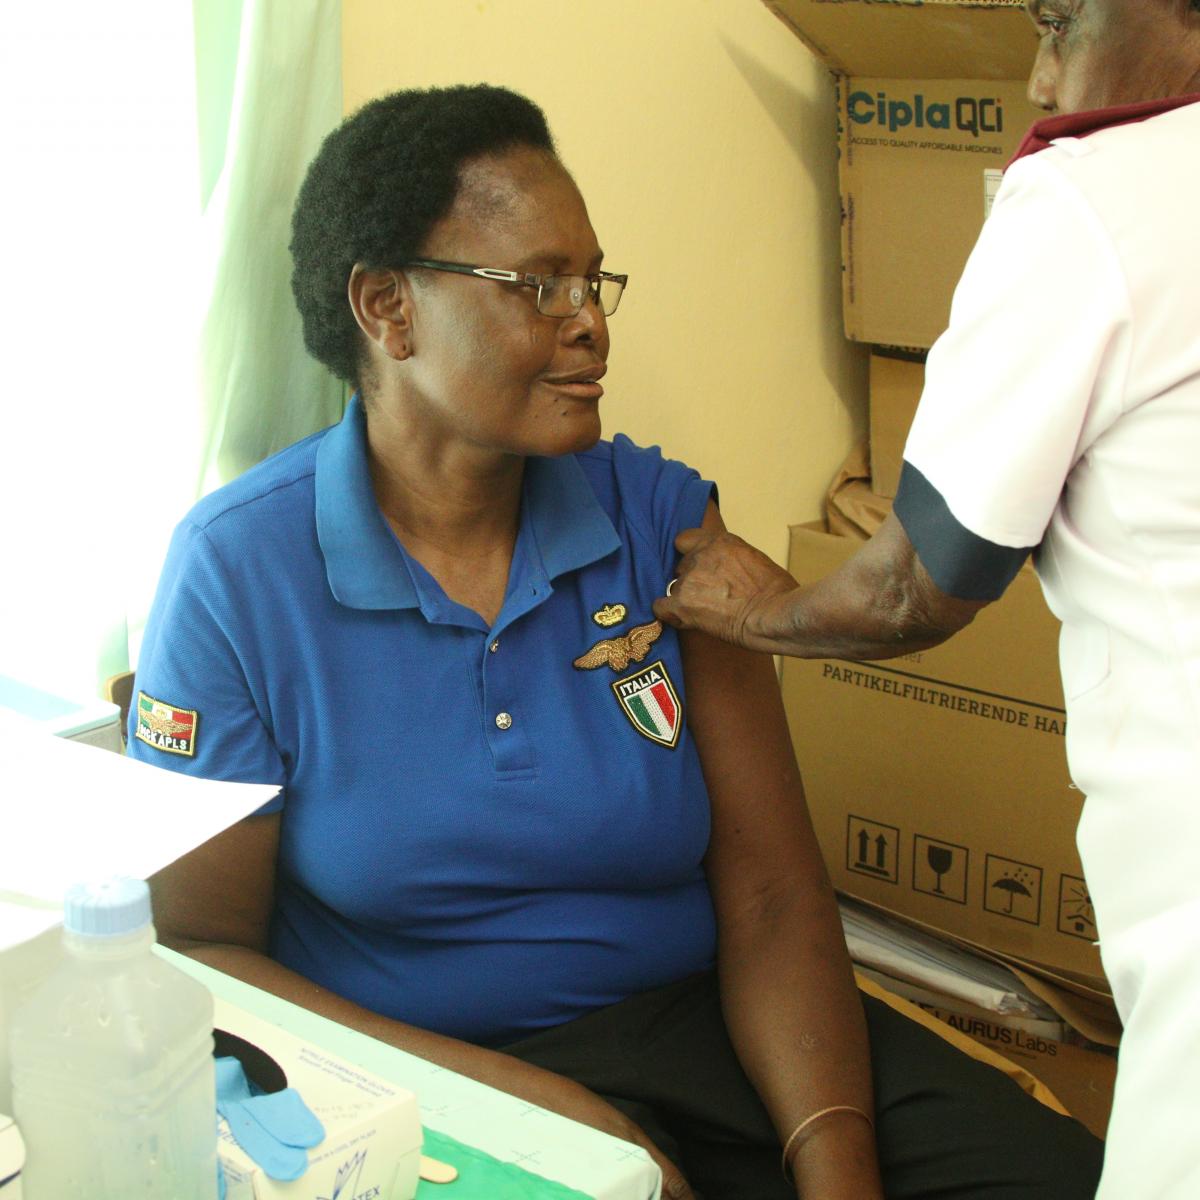 Patient getting vaccinated in Namibia